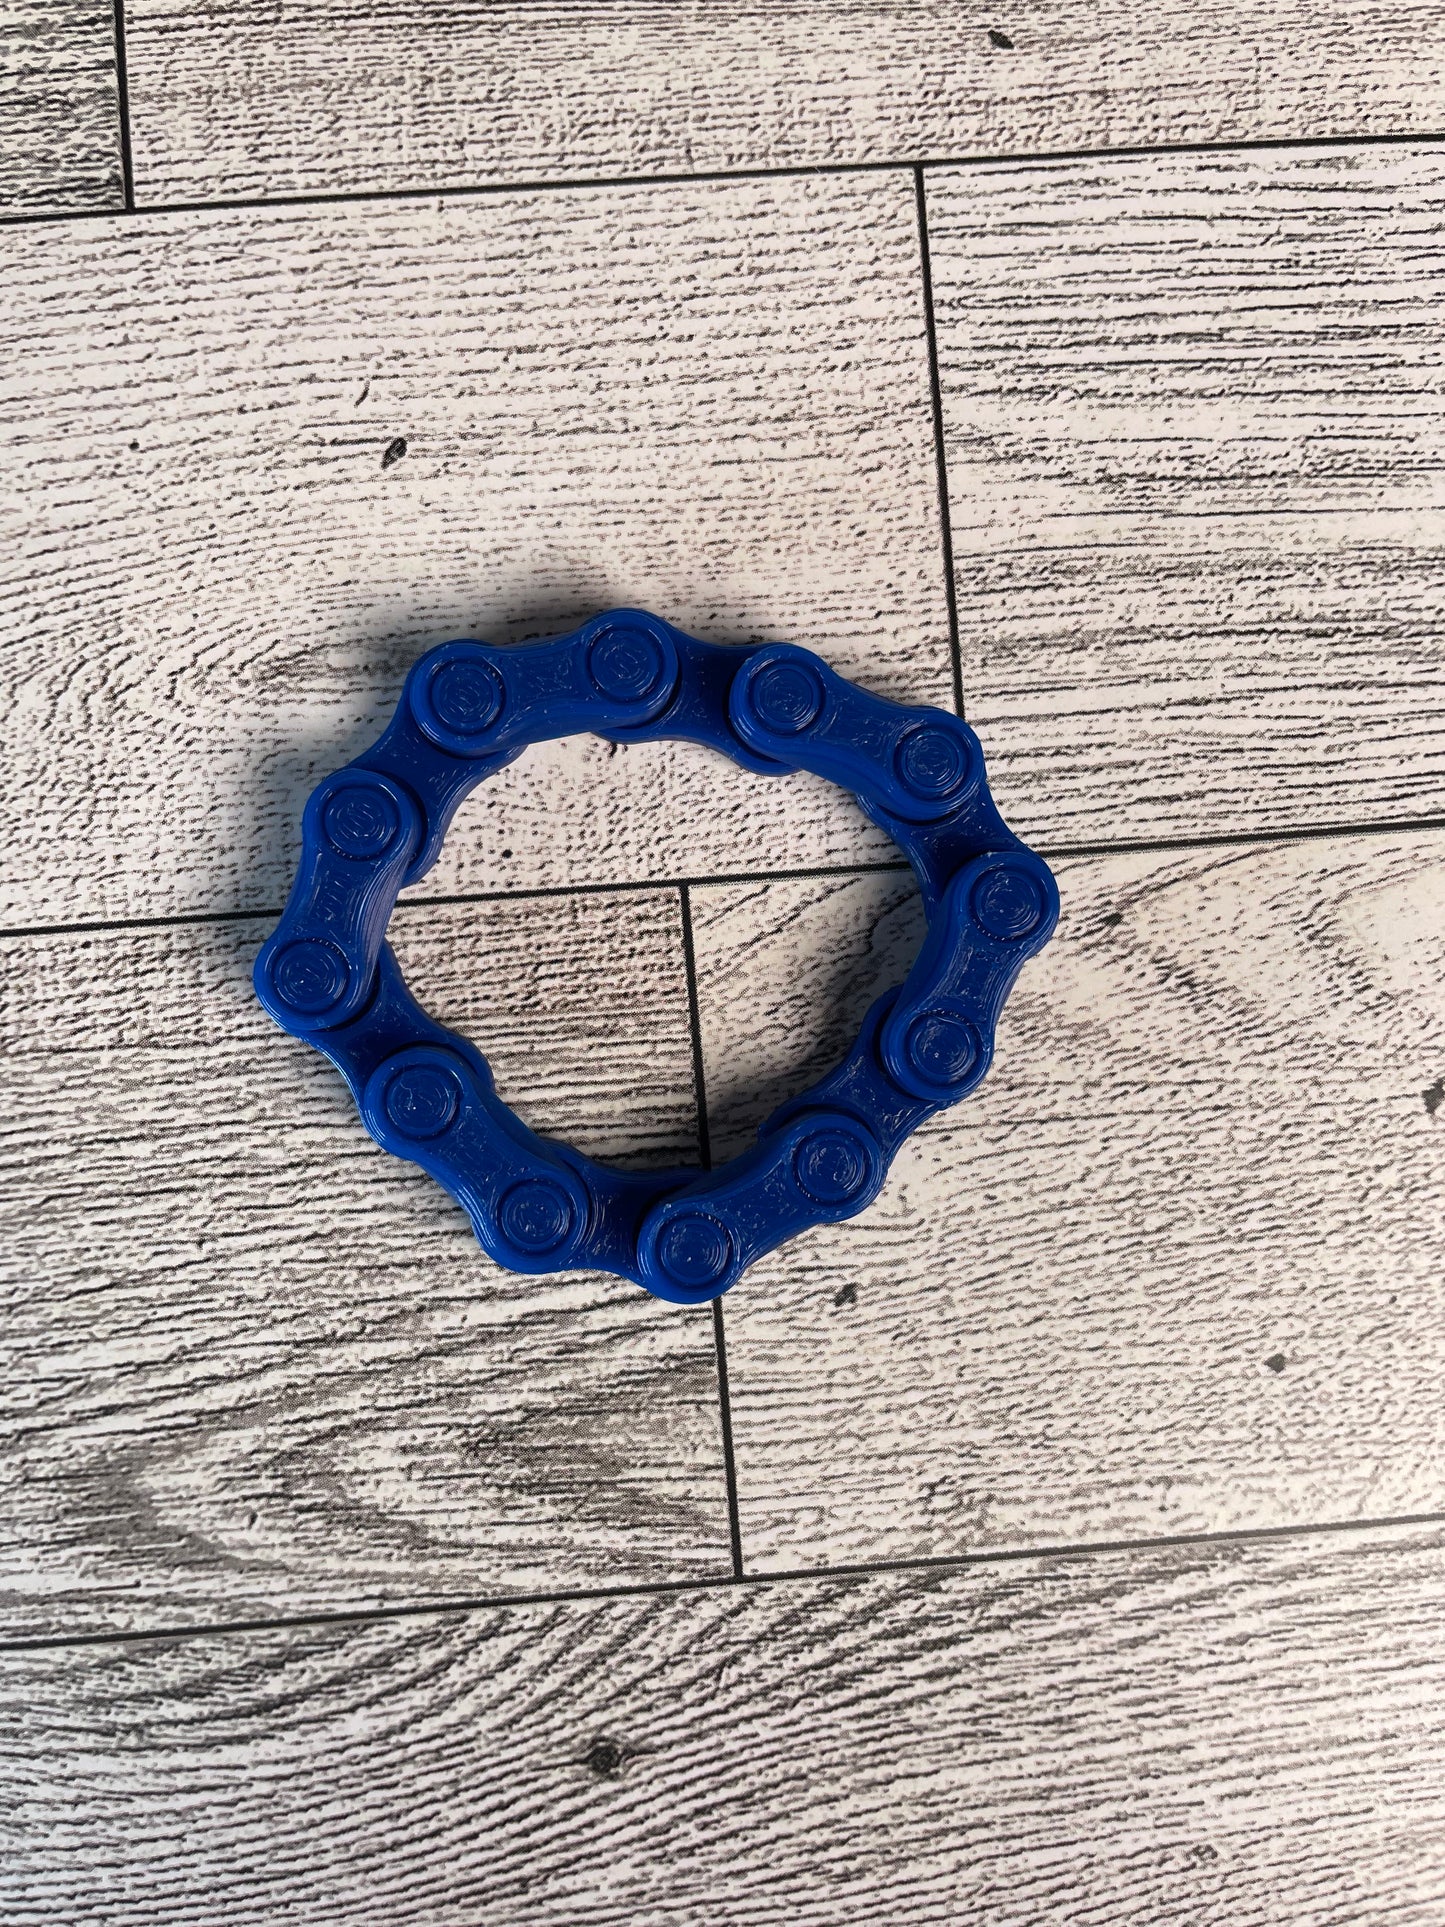 A blue chain link on a wood backdrop. The chain is arranged in a circle shape and there are six links.